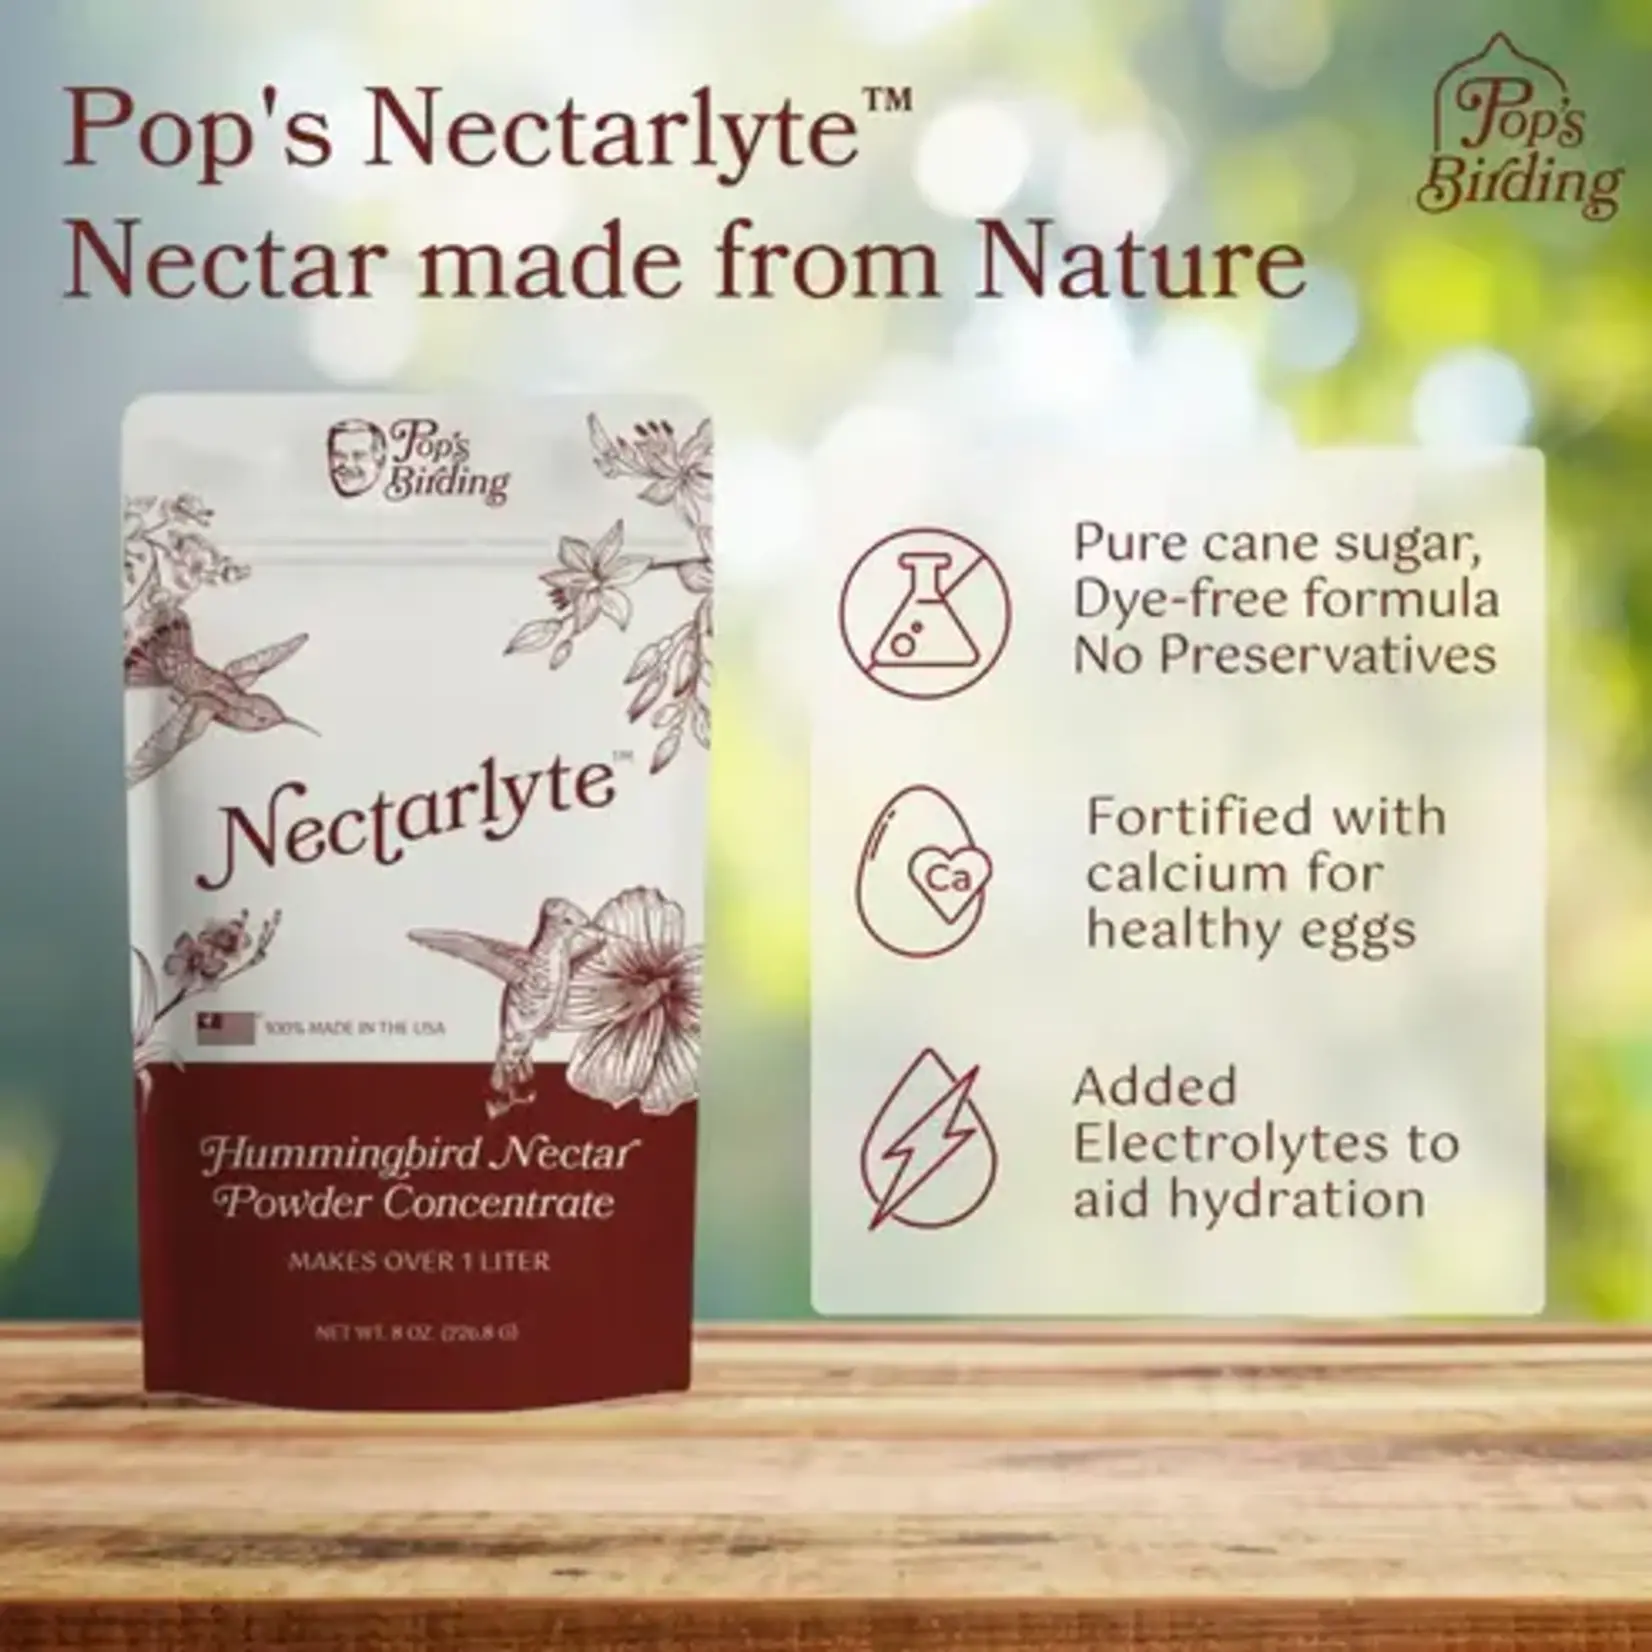 Pop's Hummingbird Swing Nectarlyte Power Nectar 2lb Concentrate